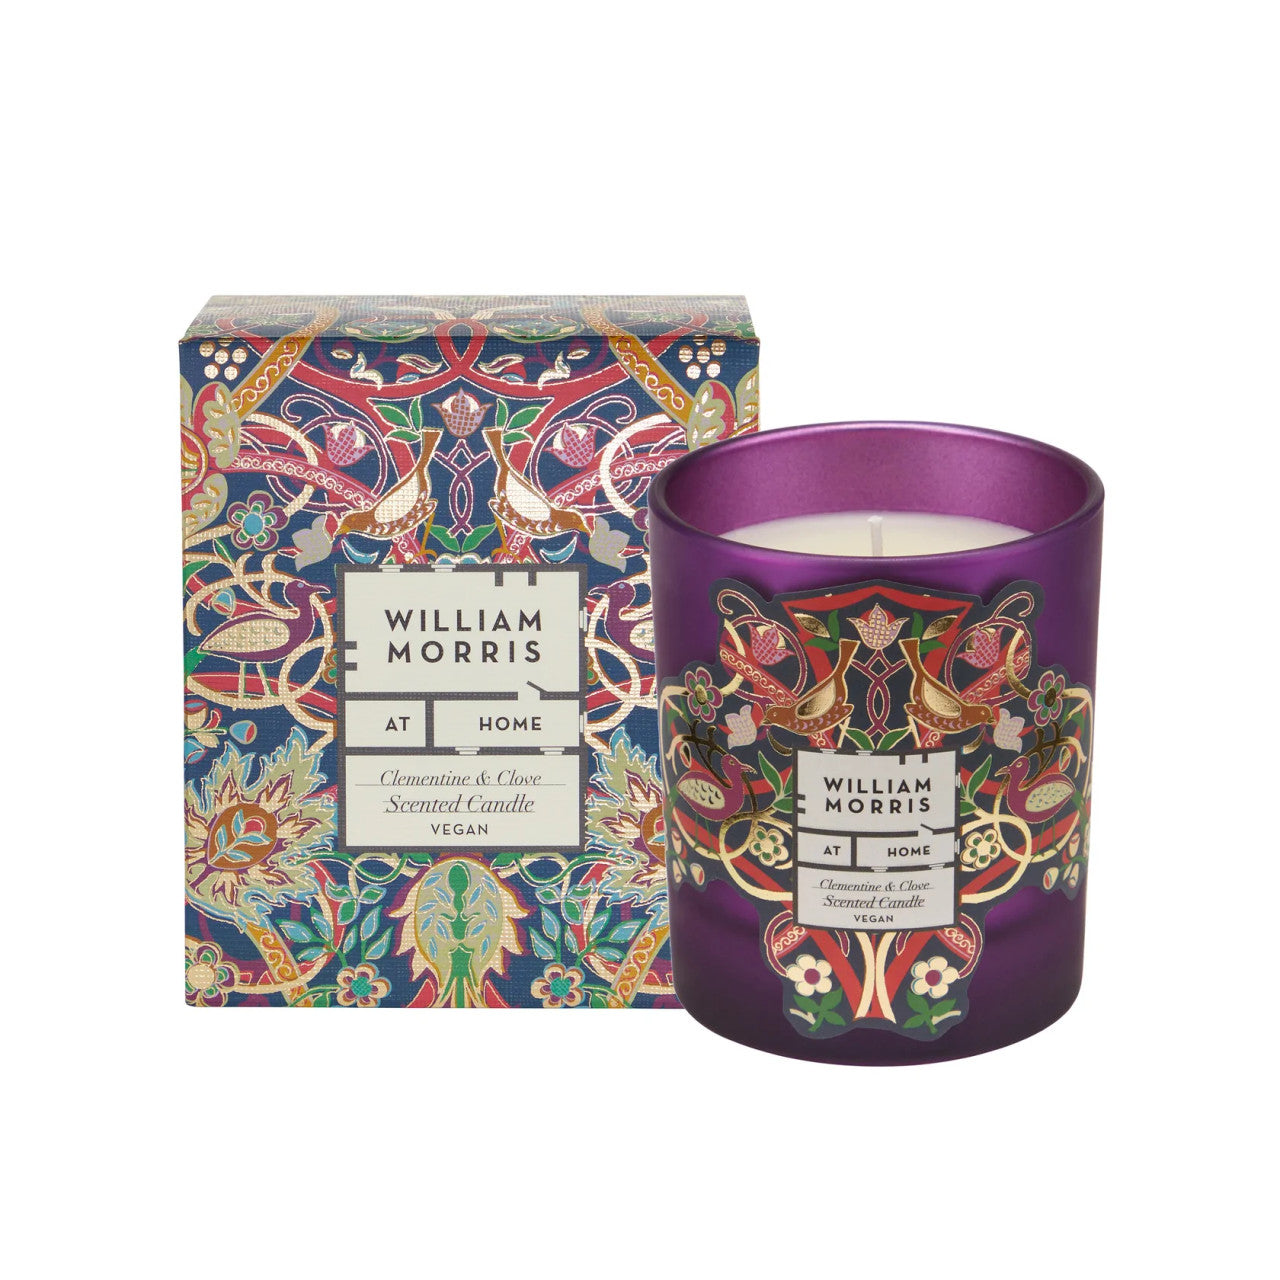 William Morris Clementine and Clove Scented Candle.